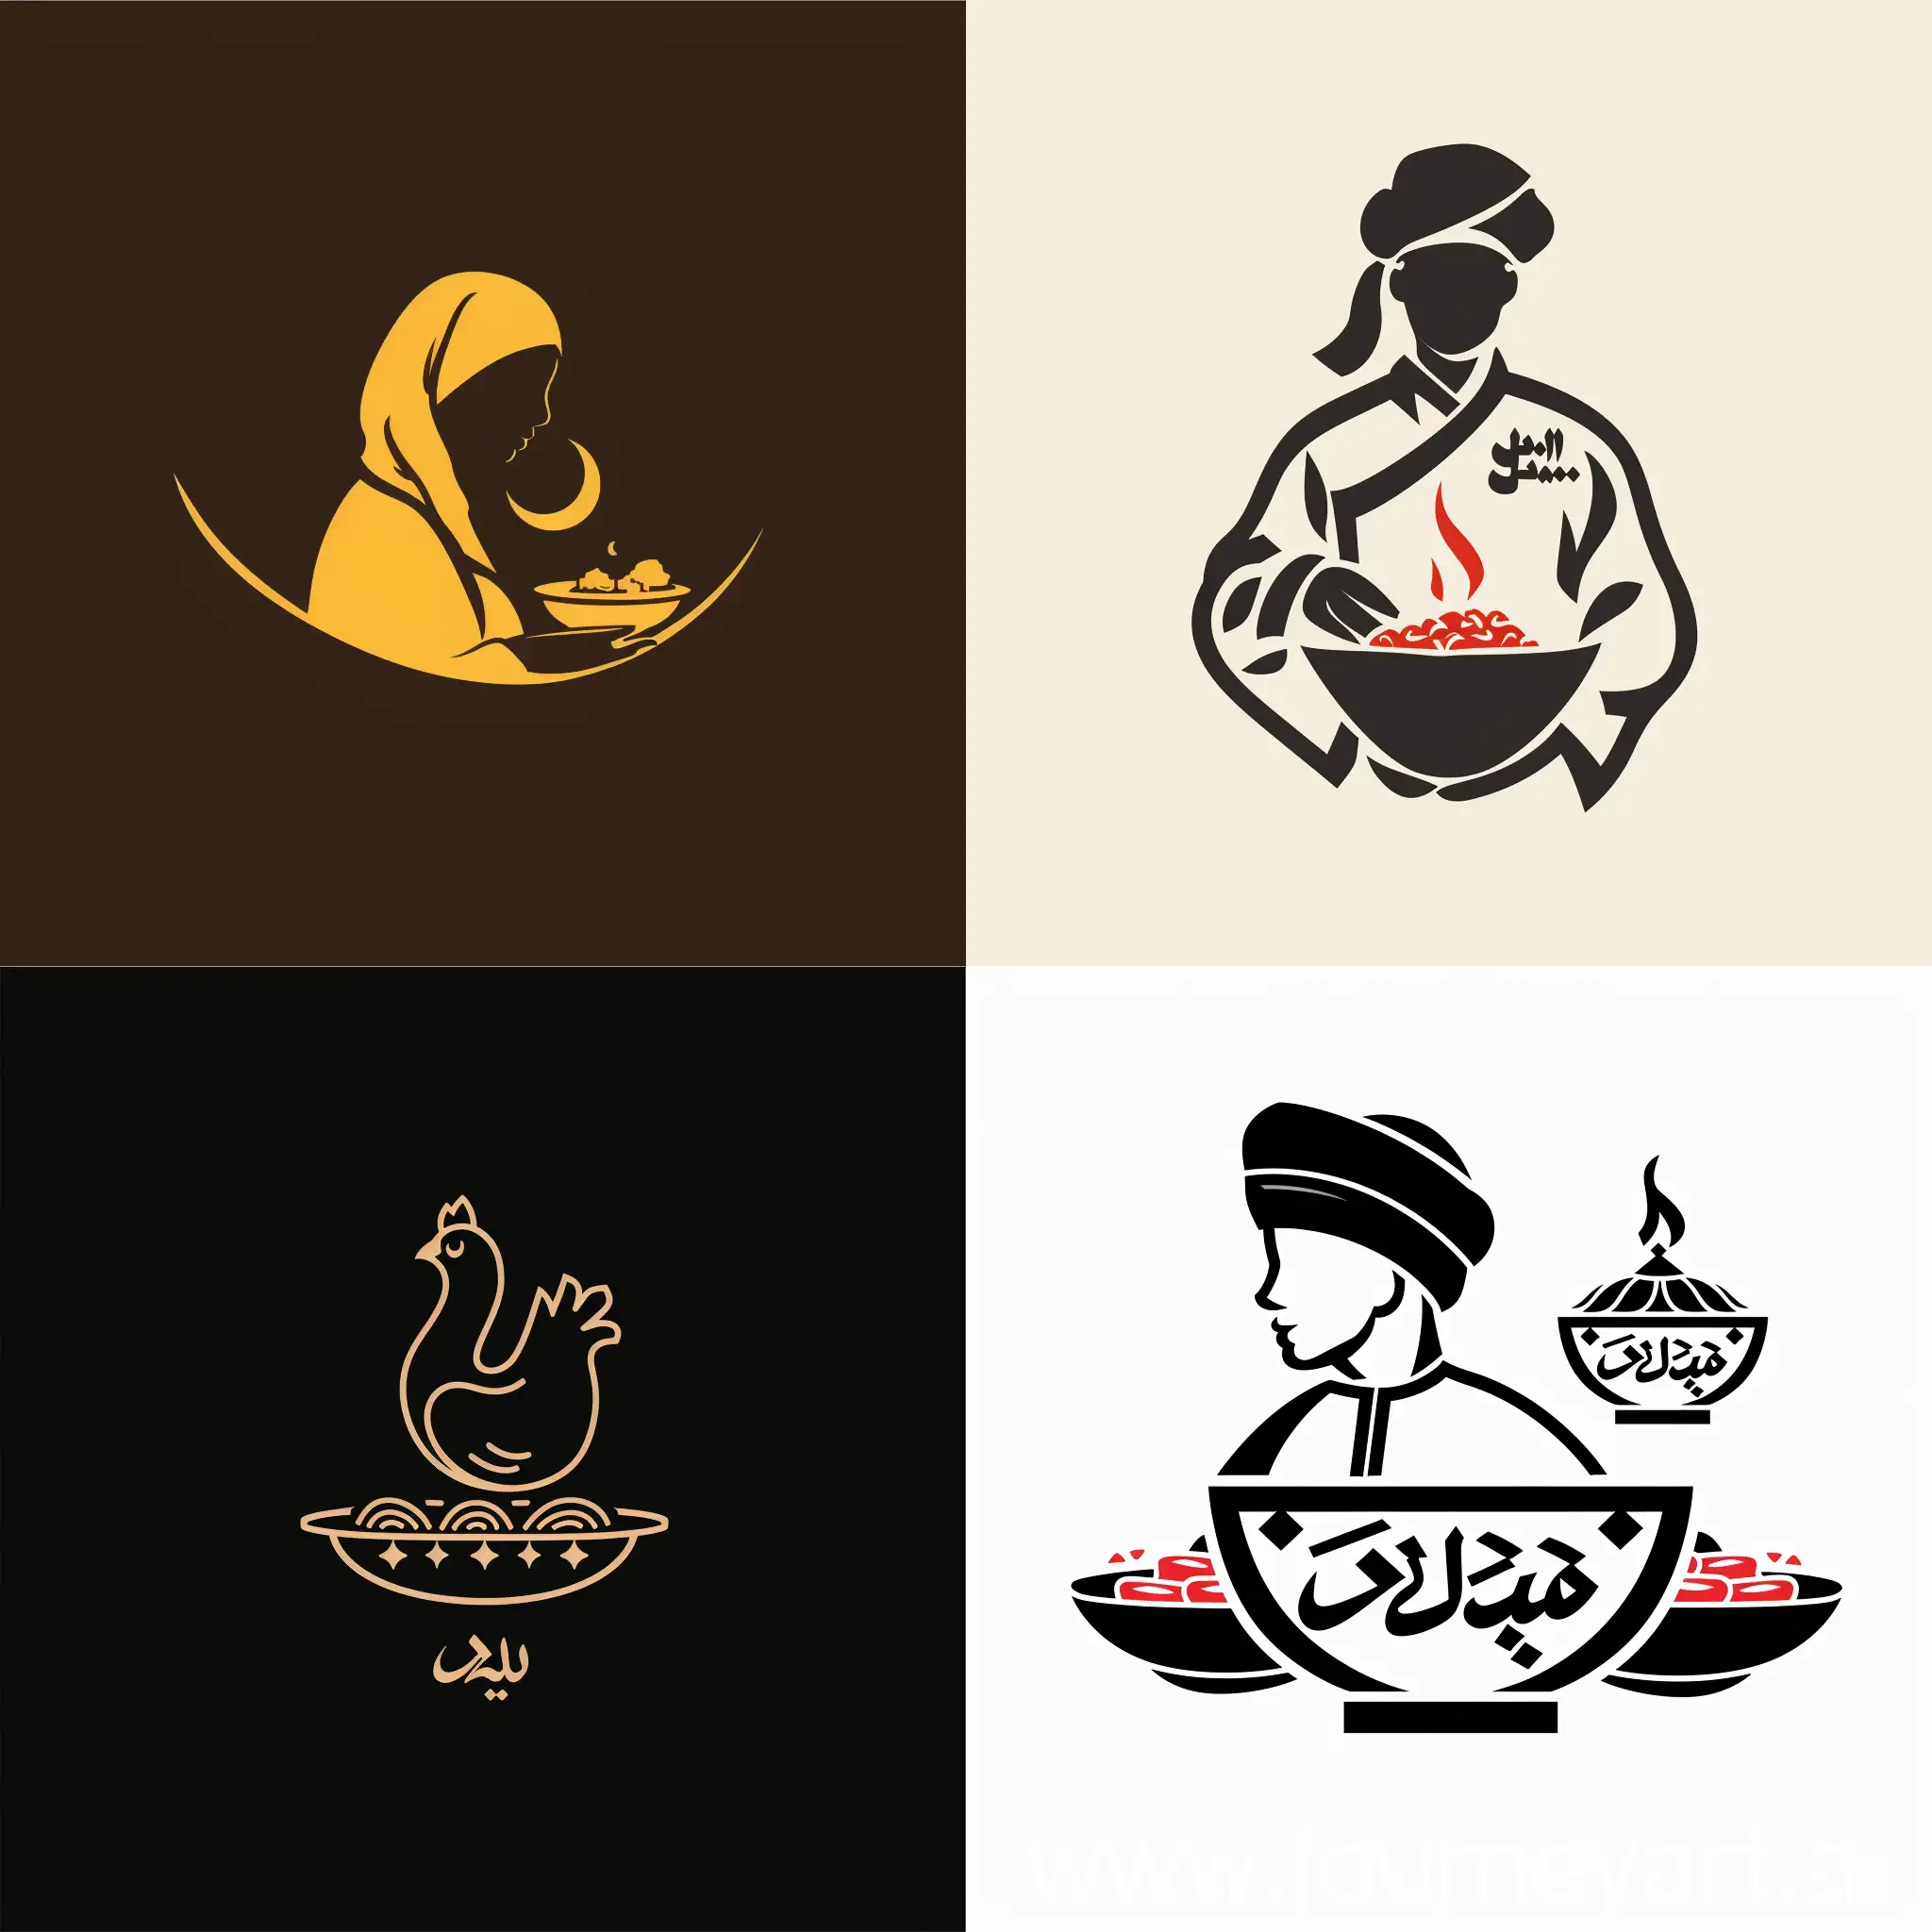 Logo for a Yemeni restaurant serving traditional meals